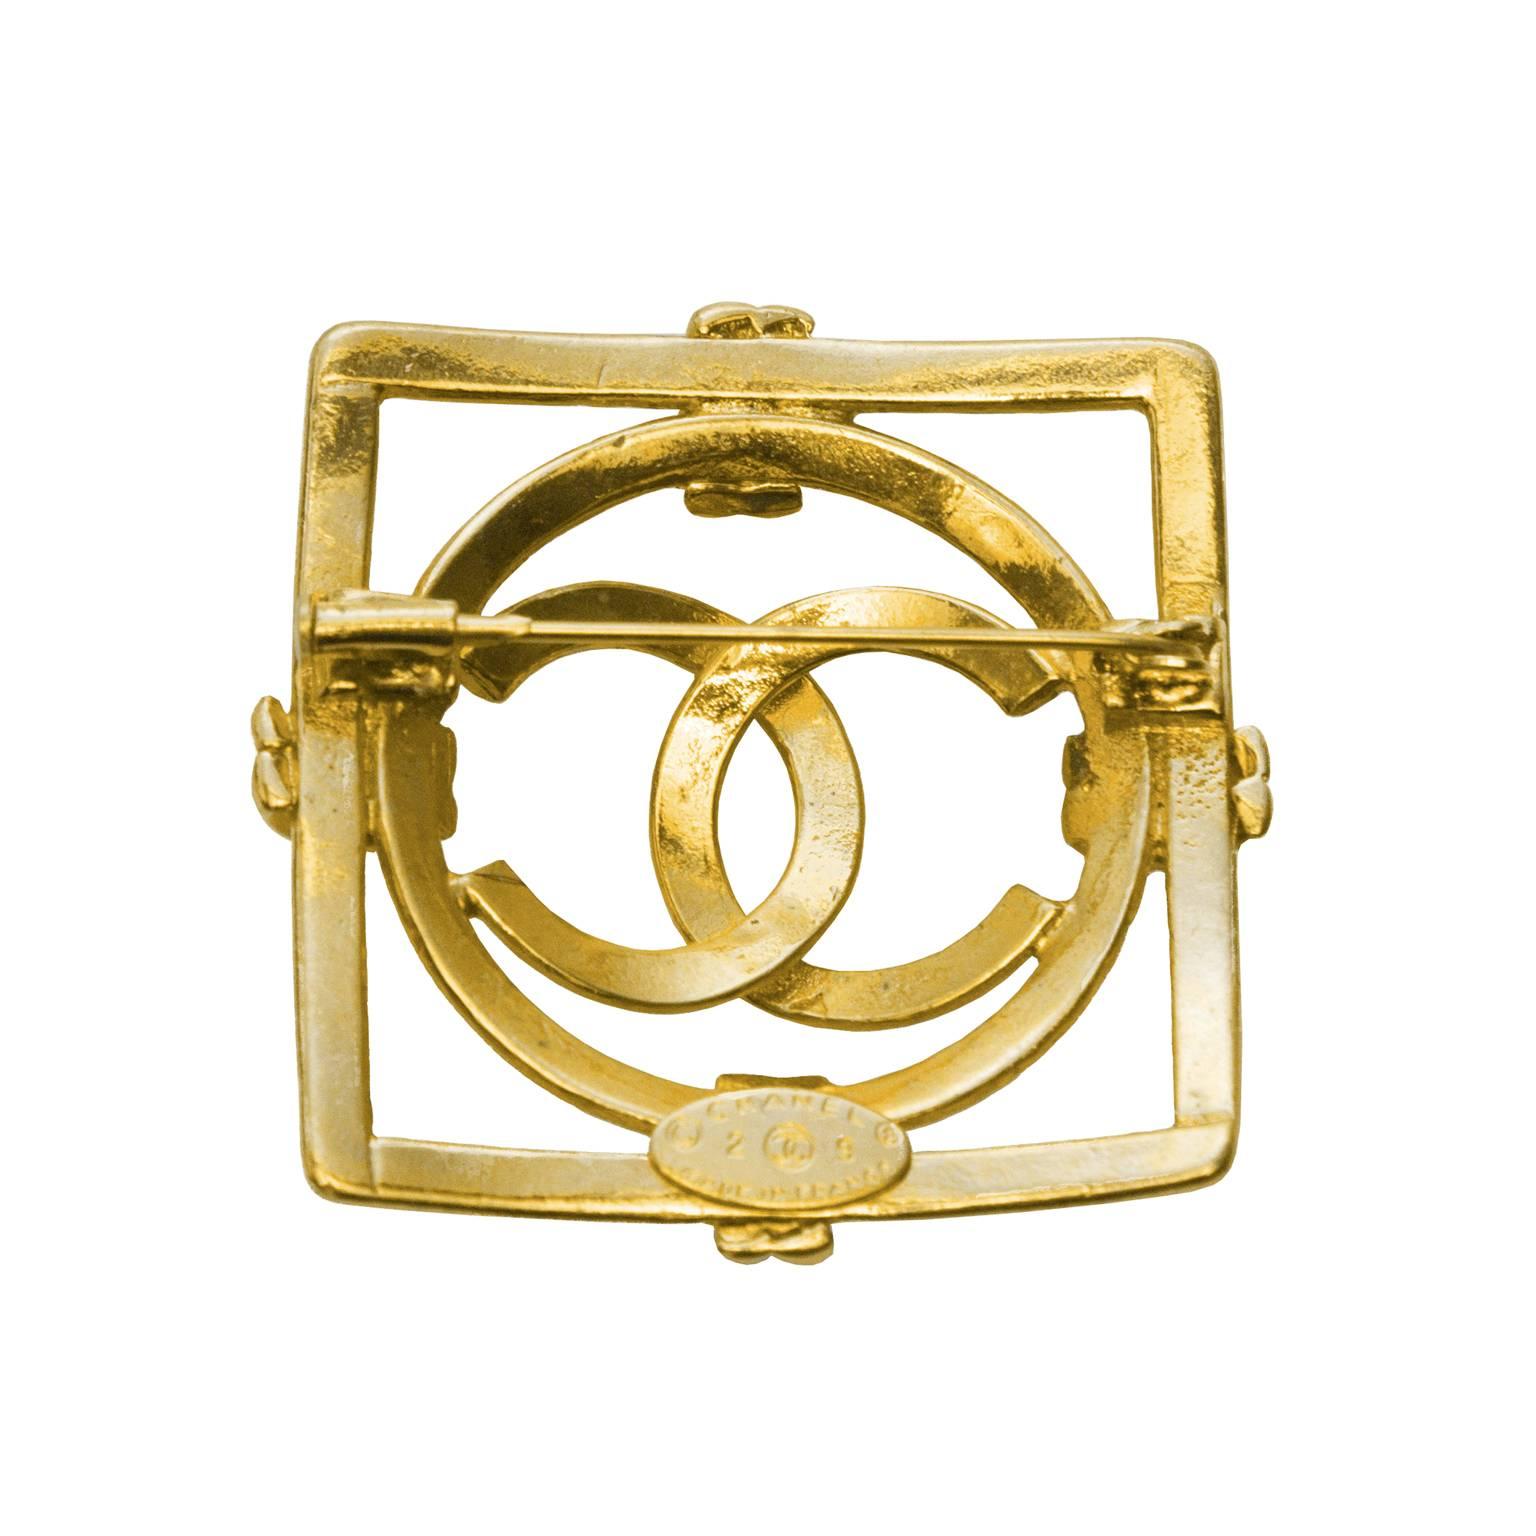 Unique geometric Chanel pin from 1992. Polished gold plate square frame, with a circular frame inside, and a CC logo in the center. Back has 'Chanel 29 Made in France' stamp, and a horizontal pin closure. Excellent vintage condition. 
